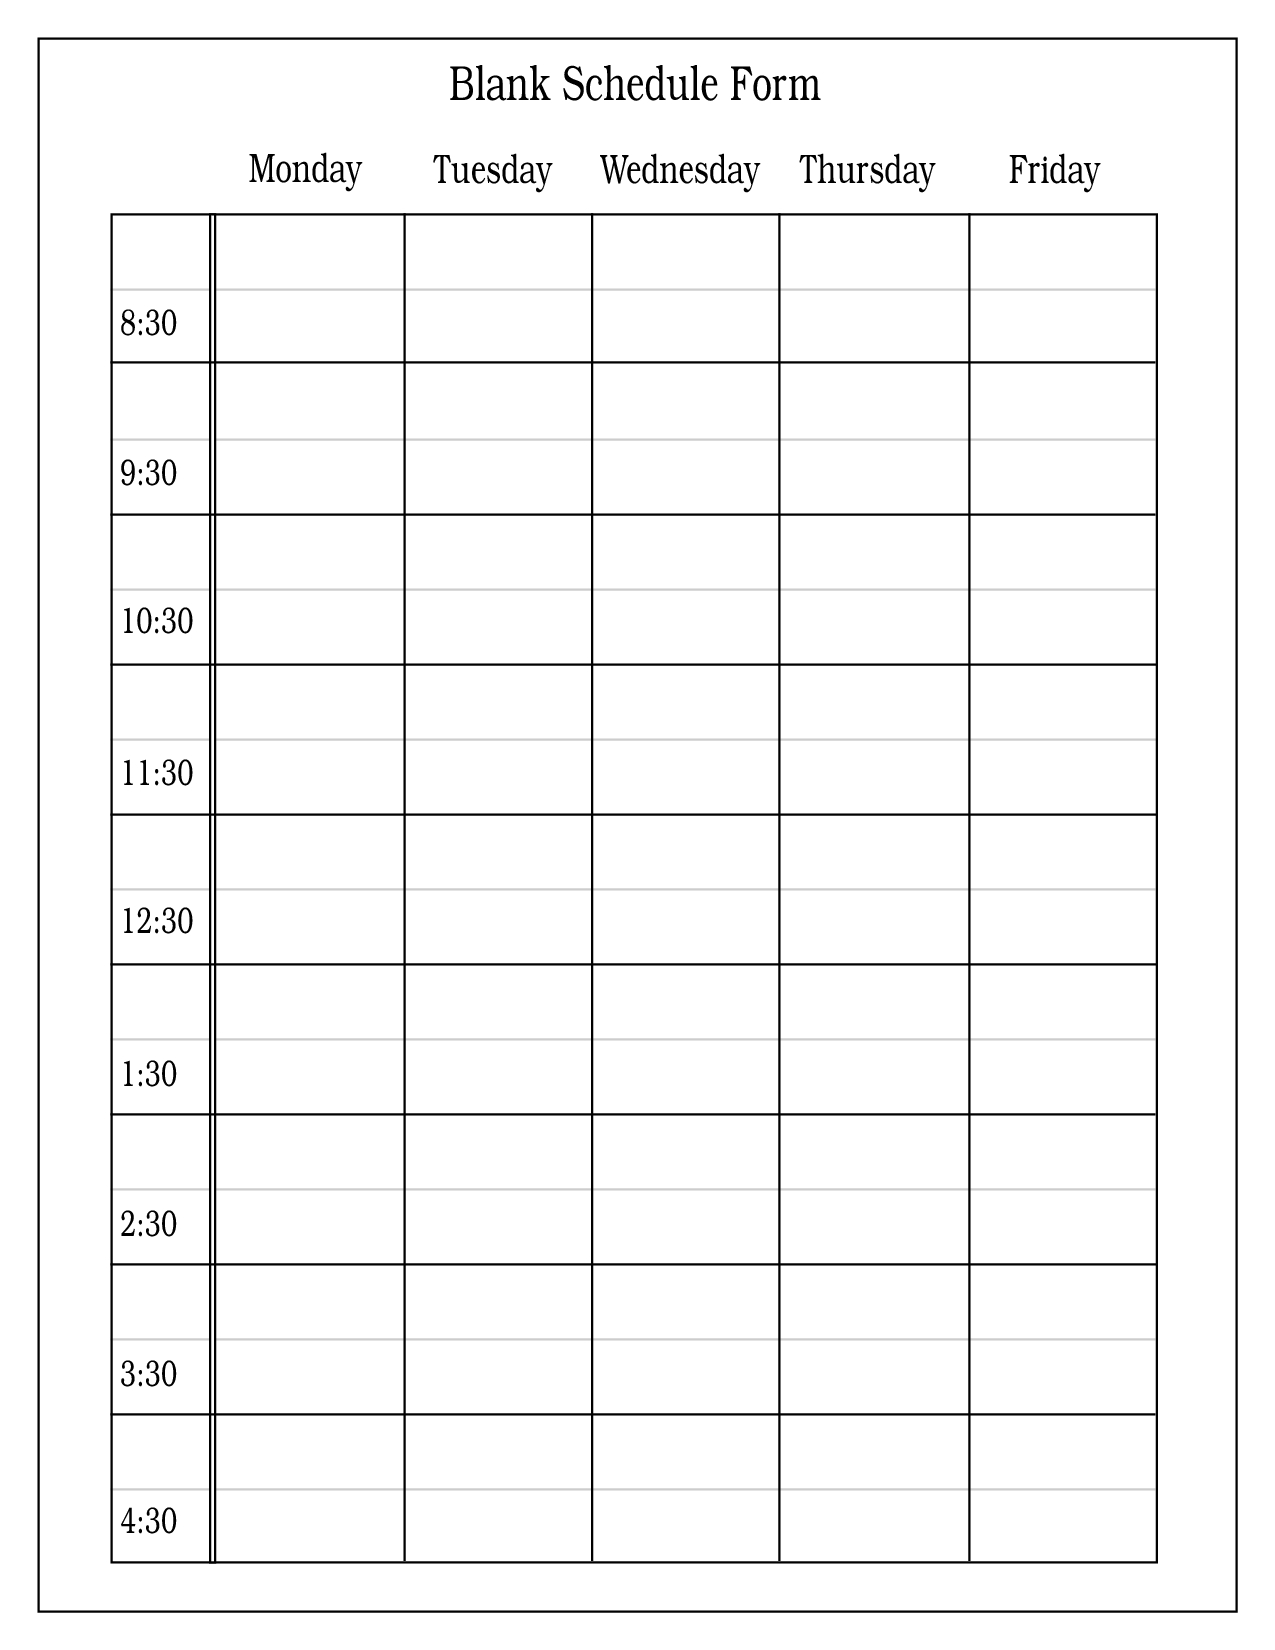 Free+Blank+Daily+Schedule+Form | Daily Schedule Template